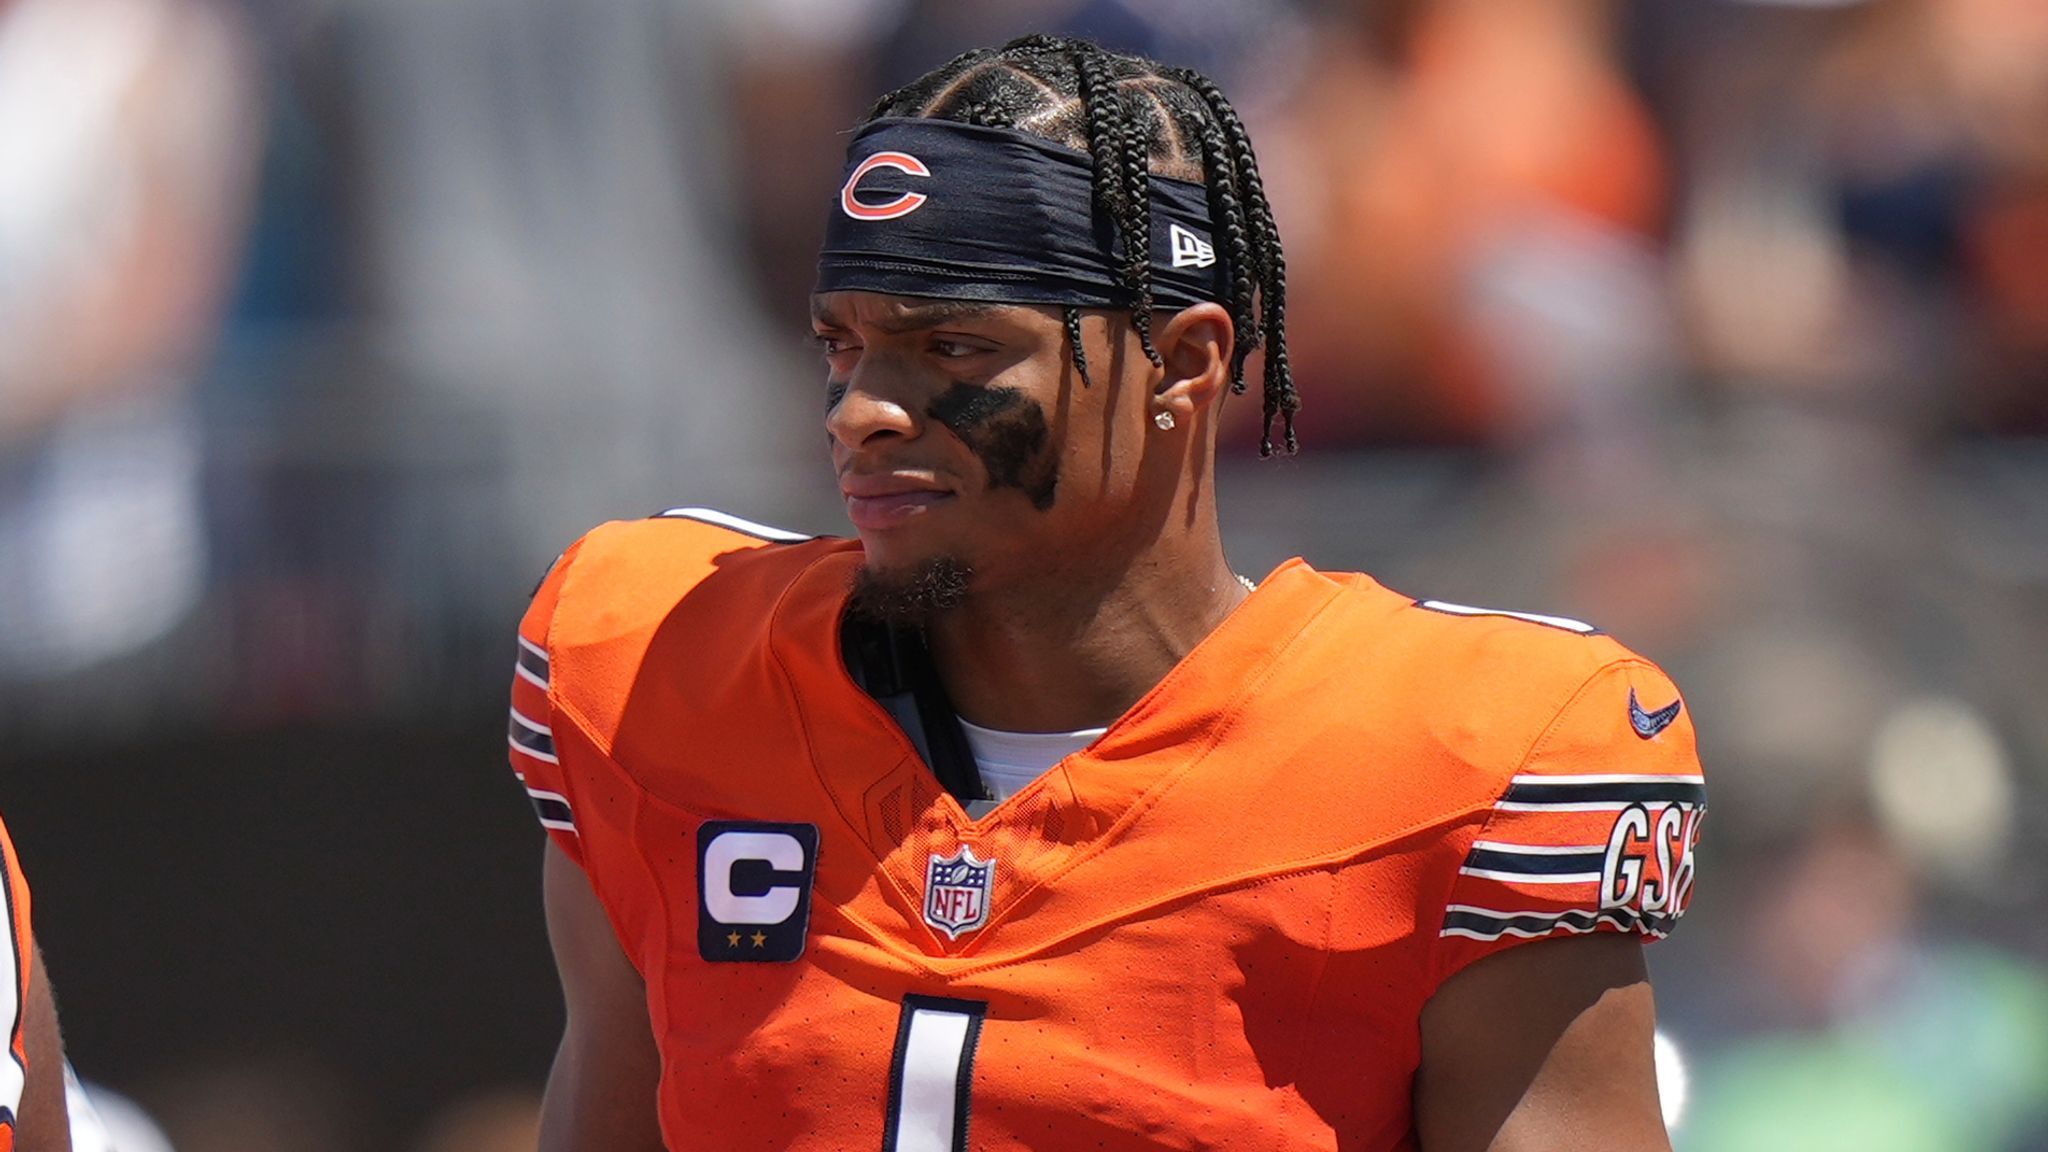 Justin Fields is Taking Ownership of the Bears Offense